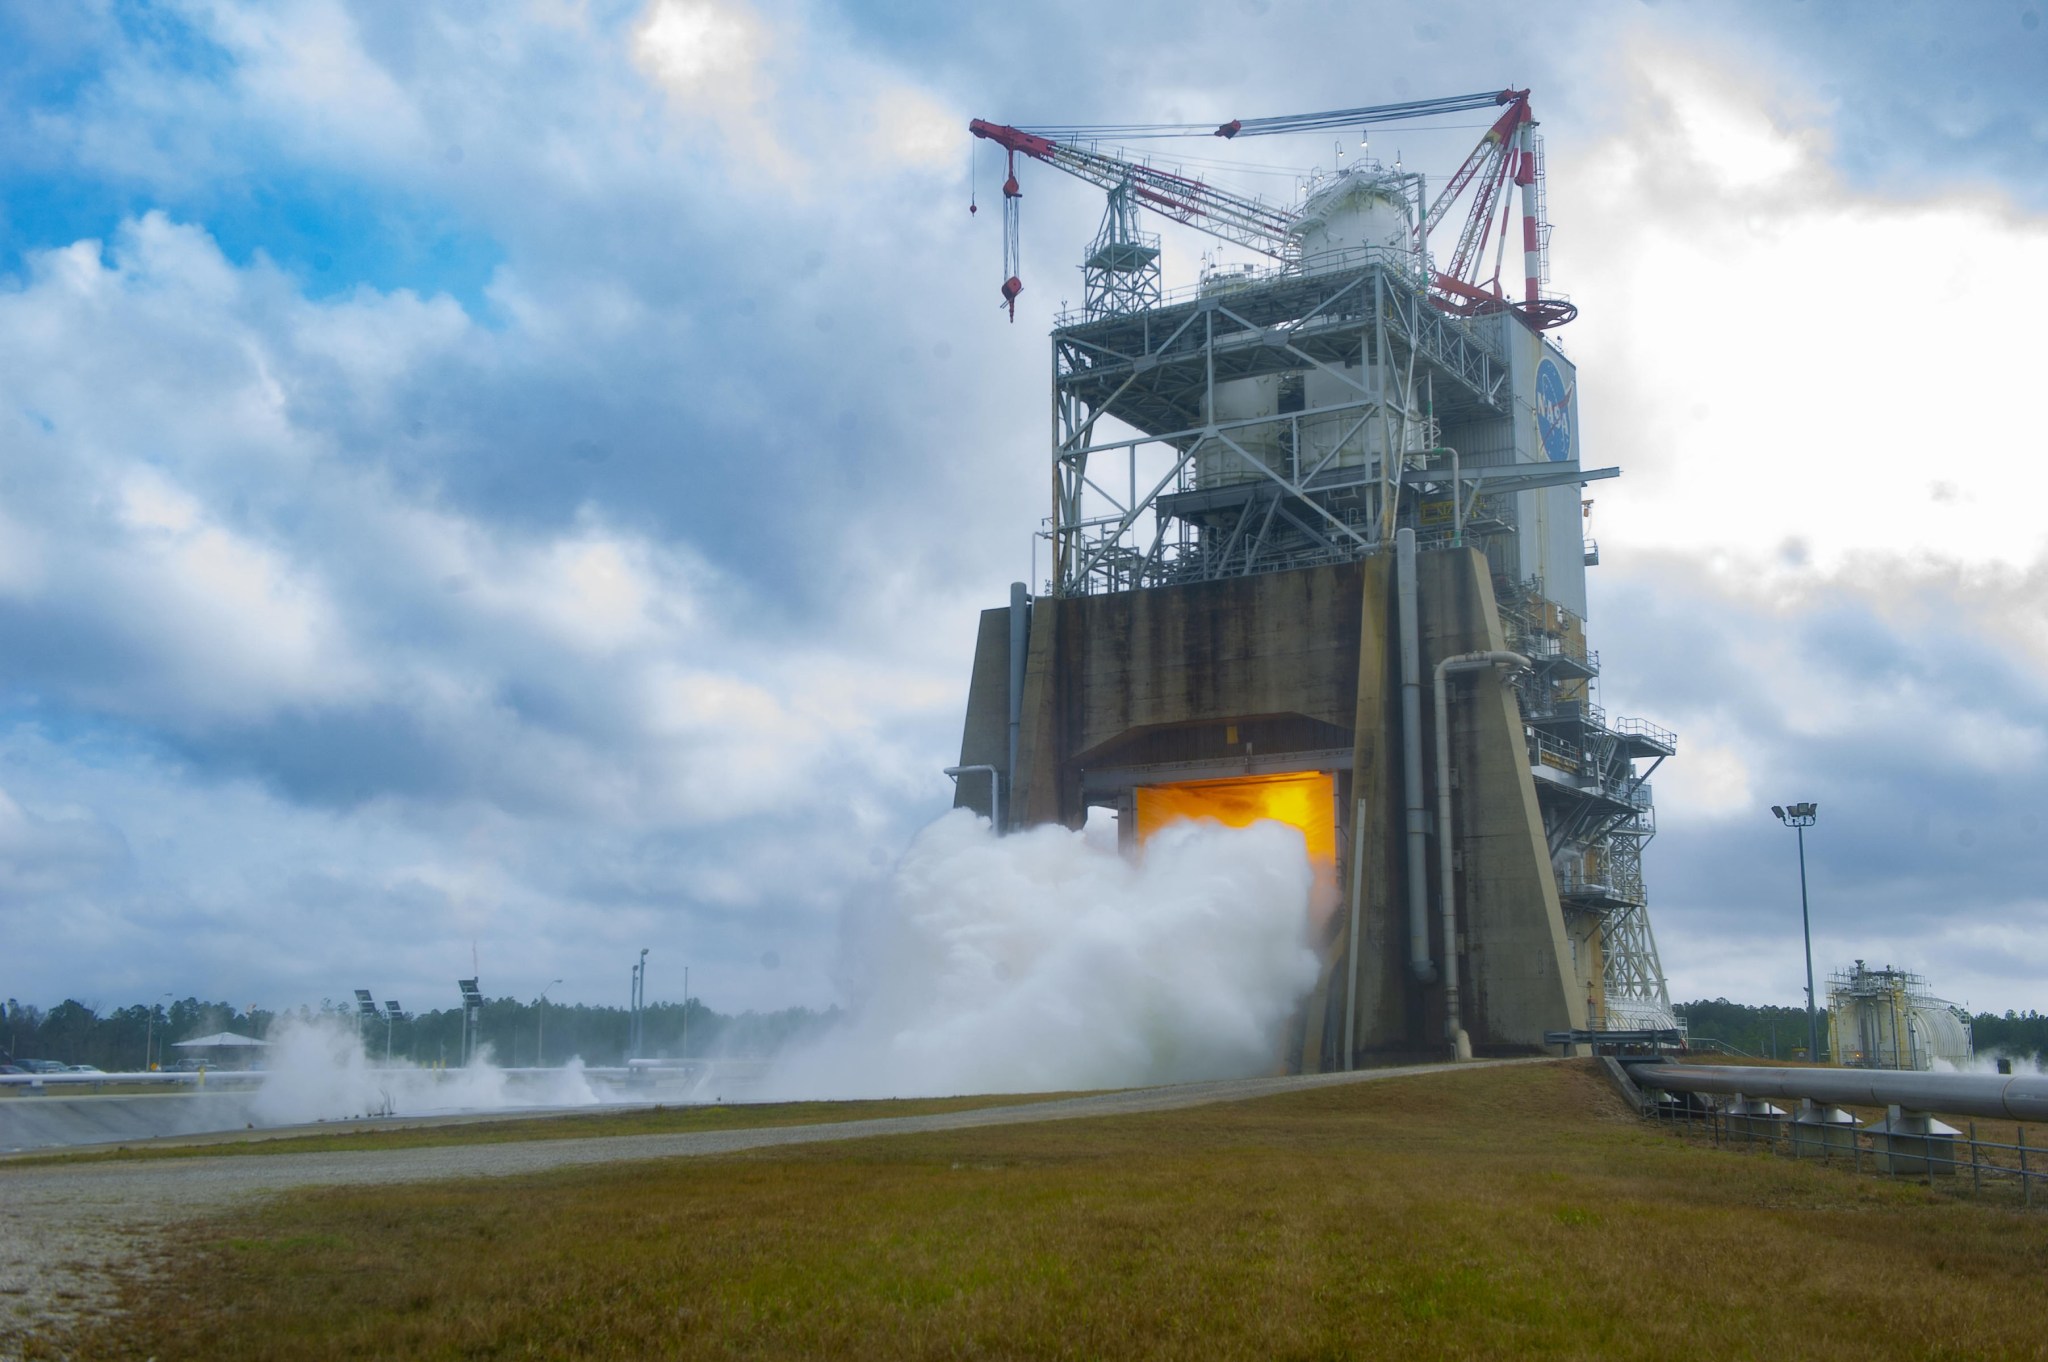 RS-25 hot fire